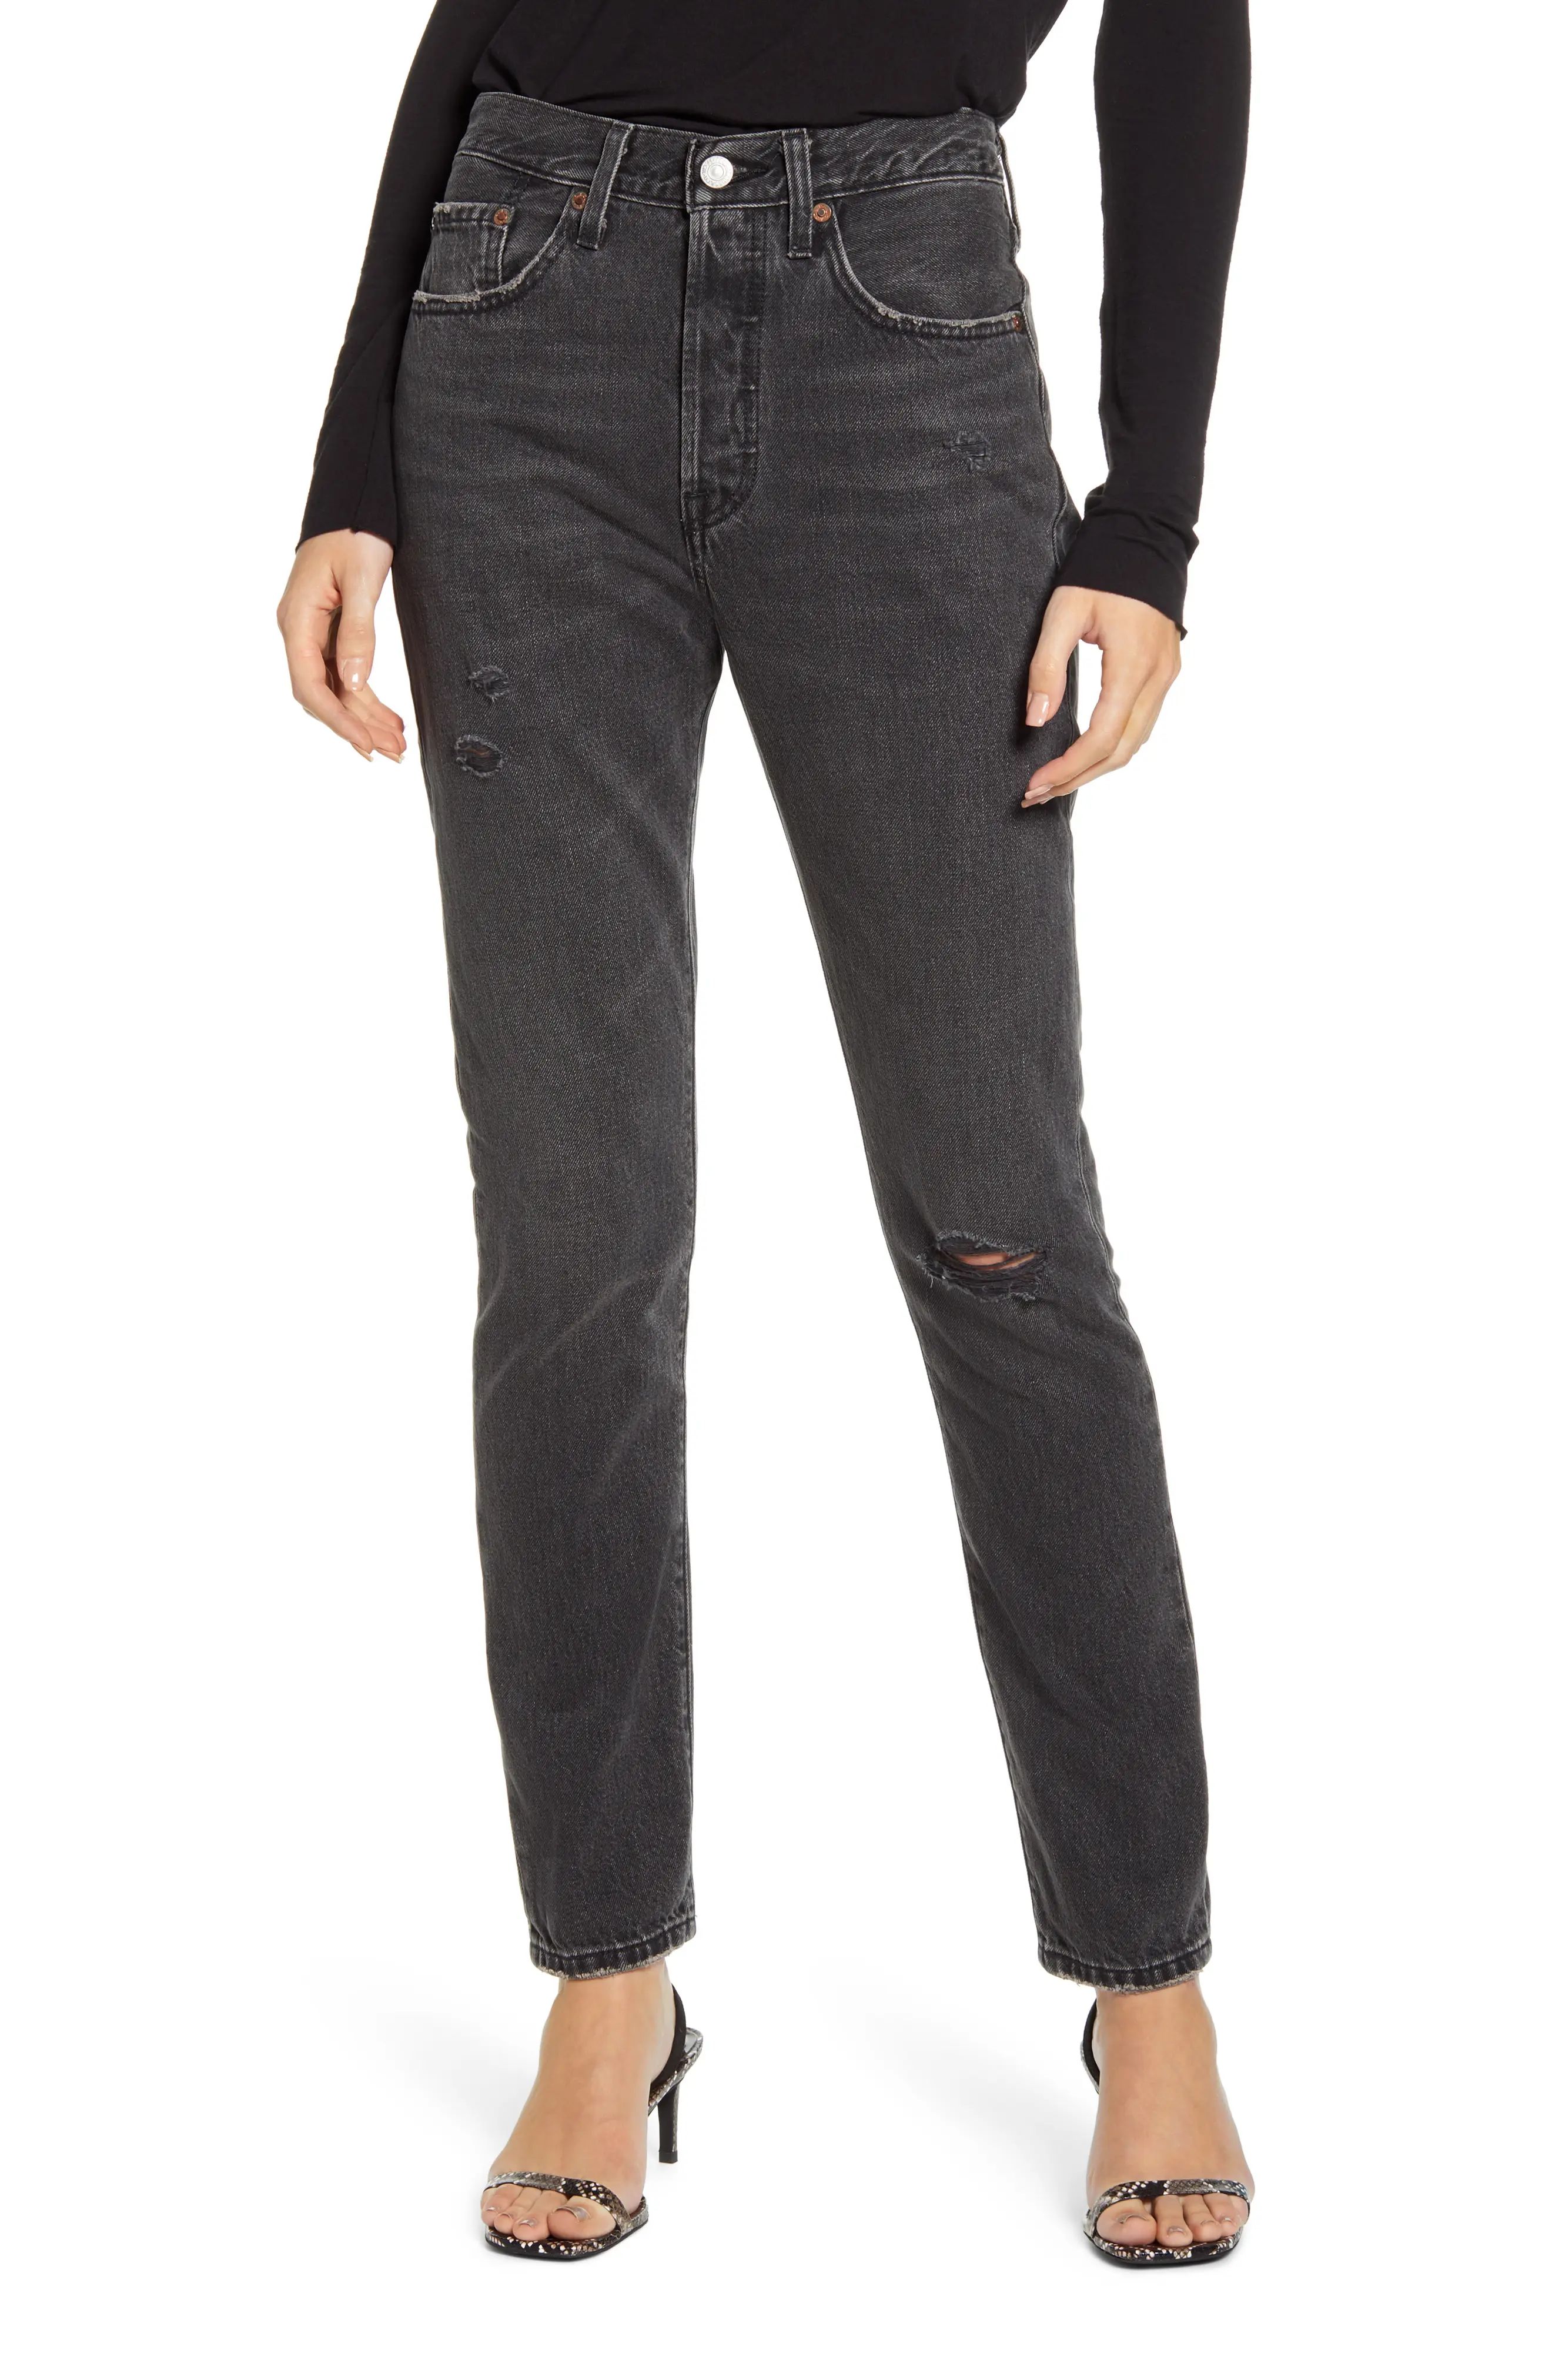 Women's Levi's 501 Ripped High Waist Skinny Jeans, Size 24 x 28 - Black | Nordstrom